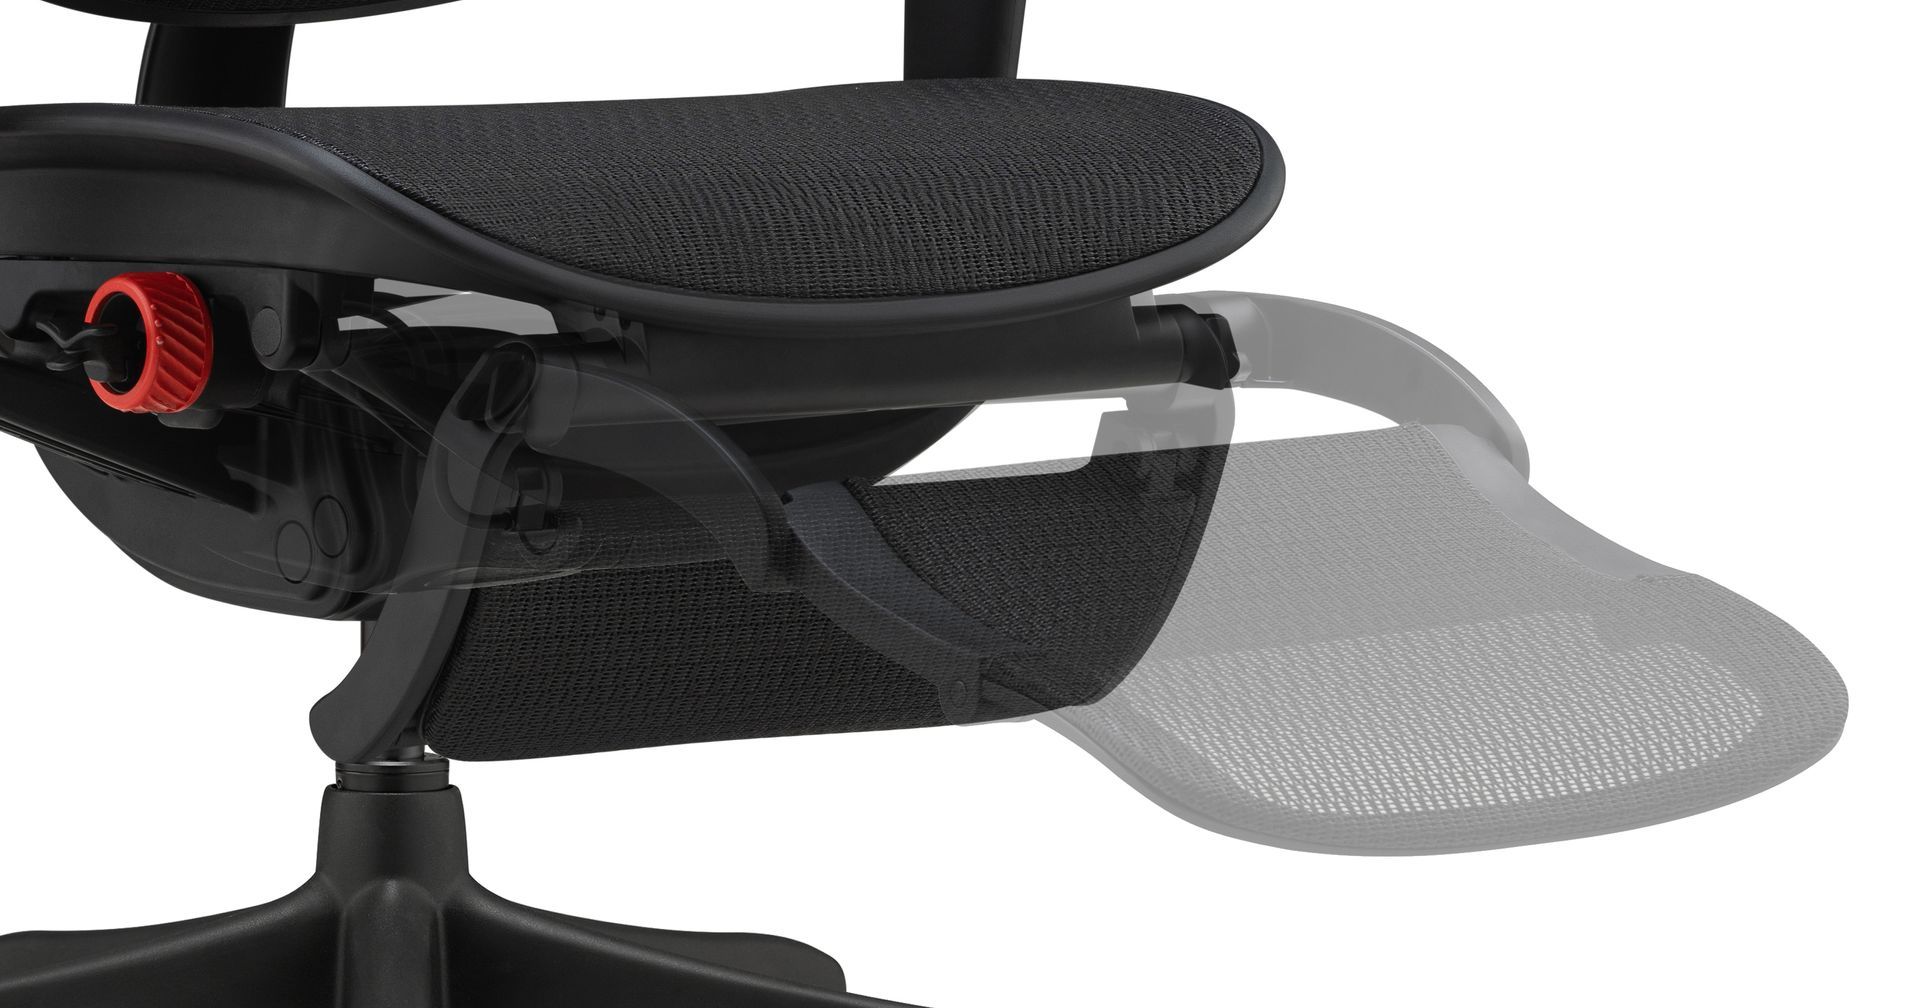 Ergohuman Ultra gaming chair legrest folding in and out from under the seat